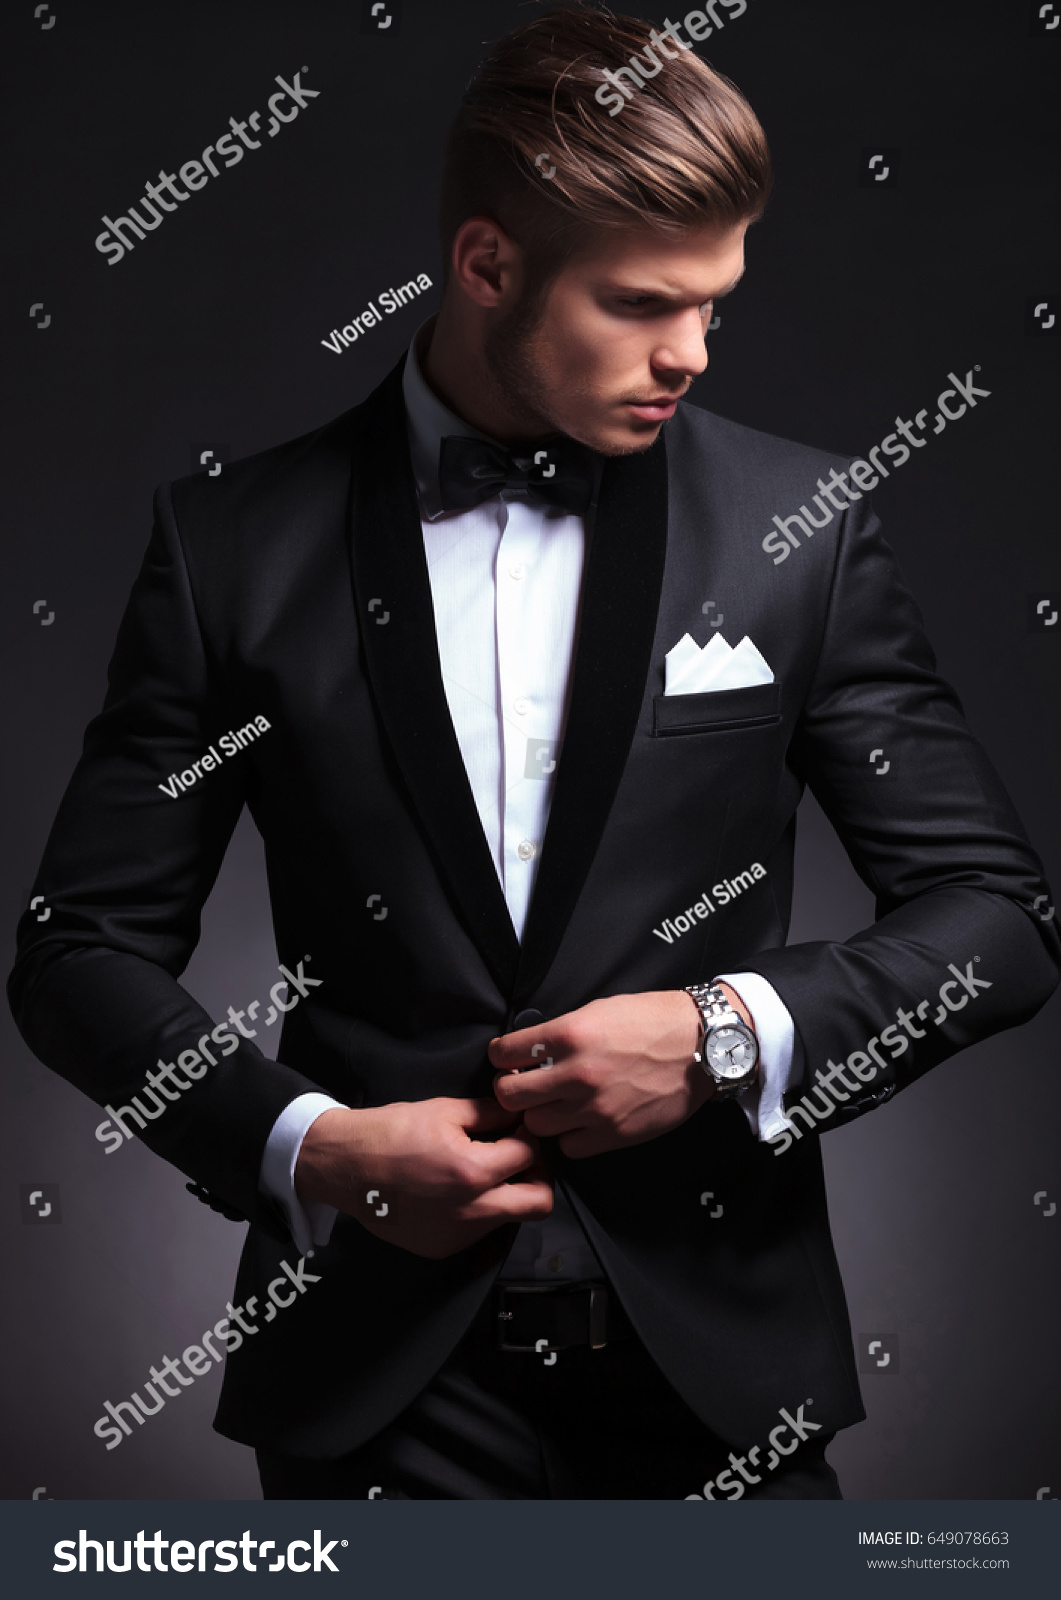 Elegant Young Fashion Man Buttoning His Stock Photo 649078663 ...